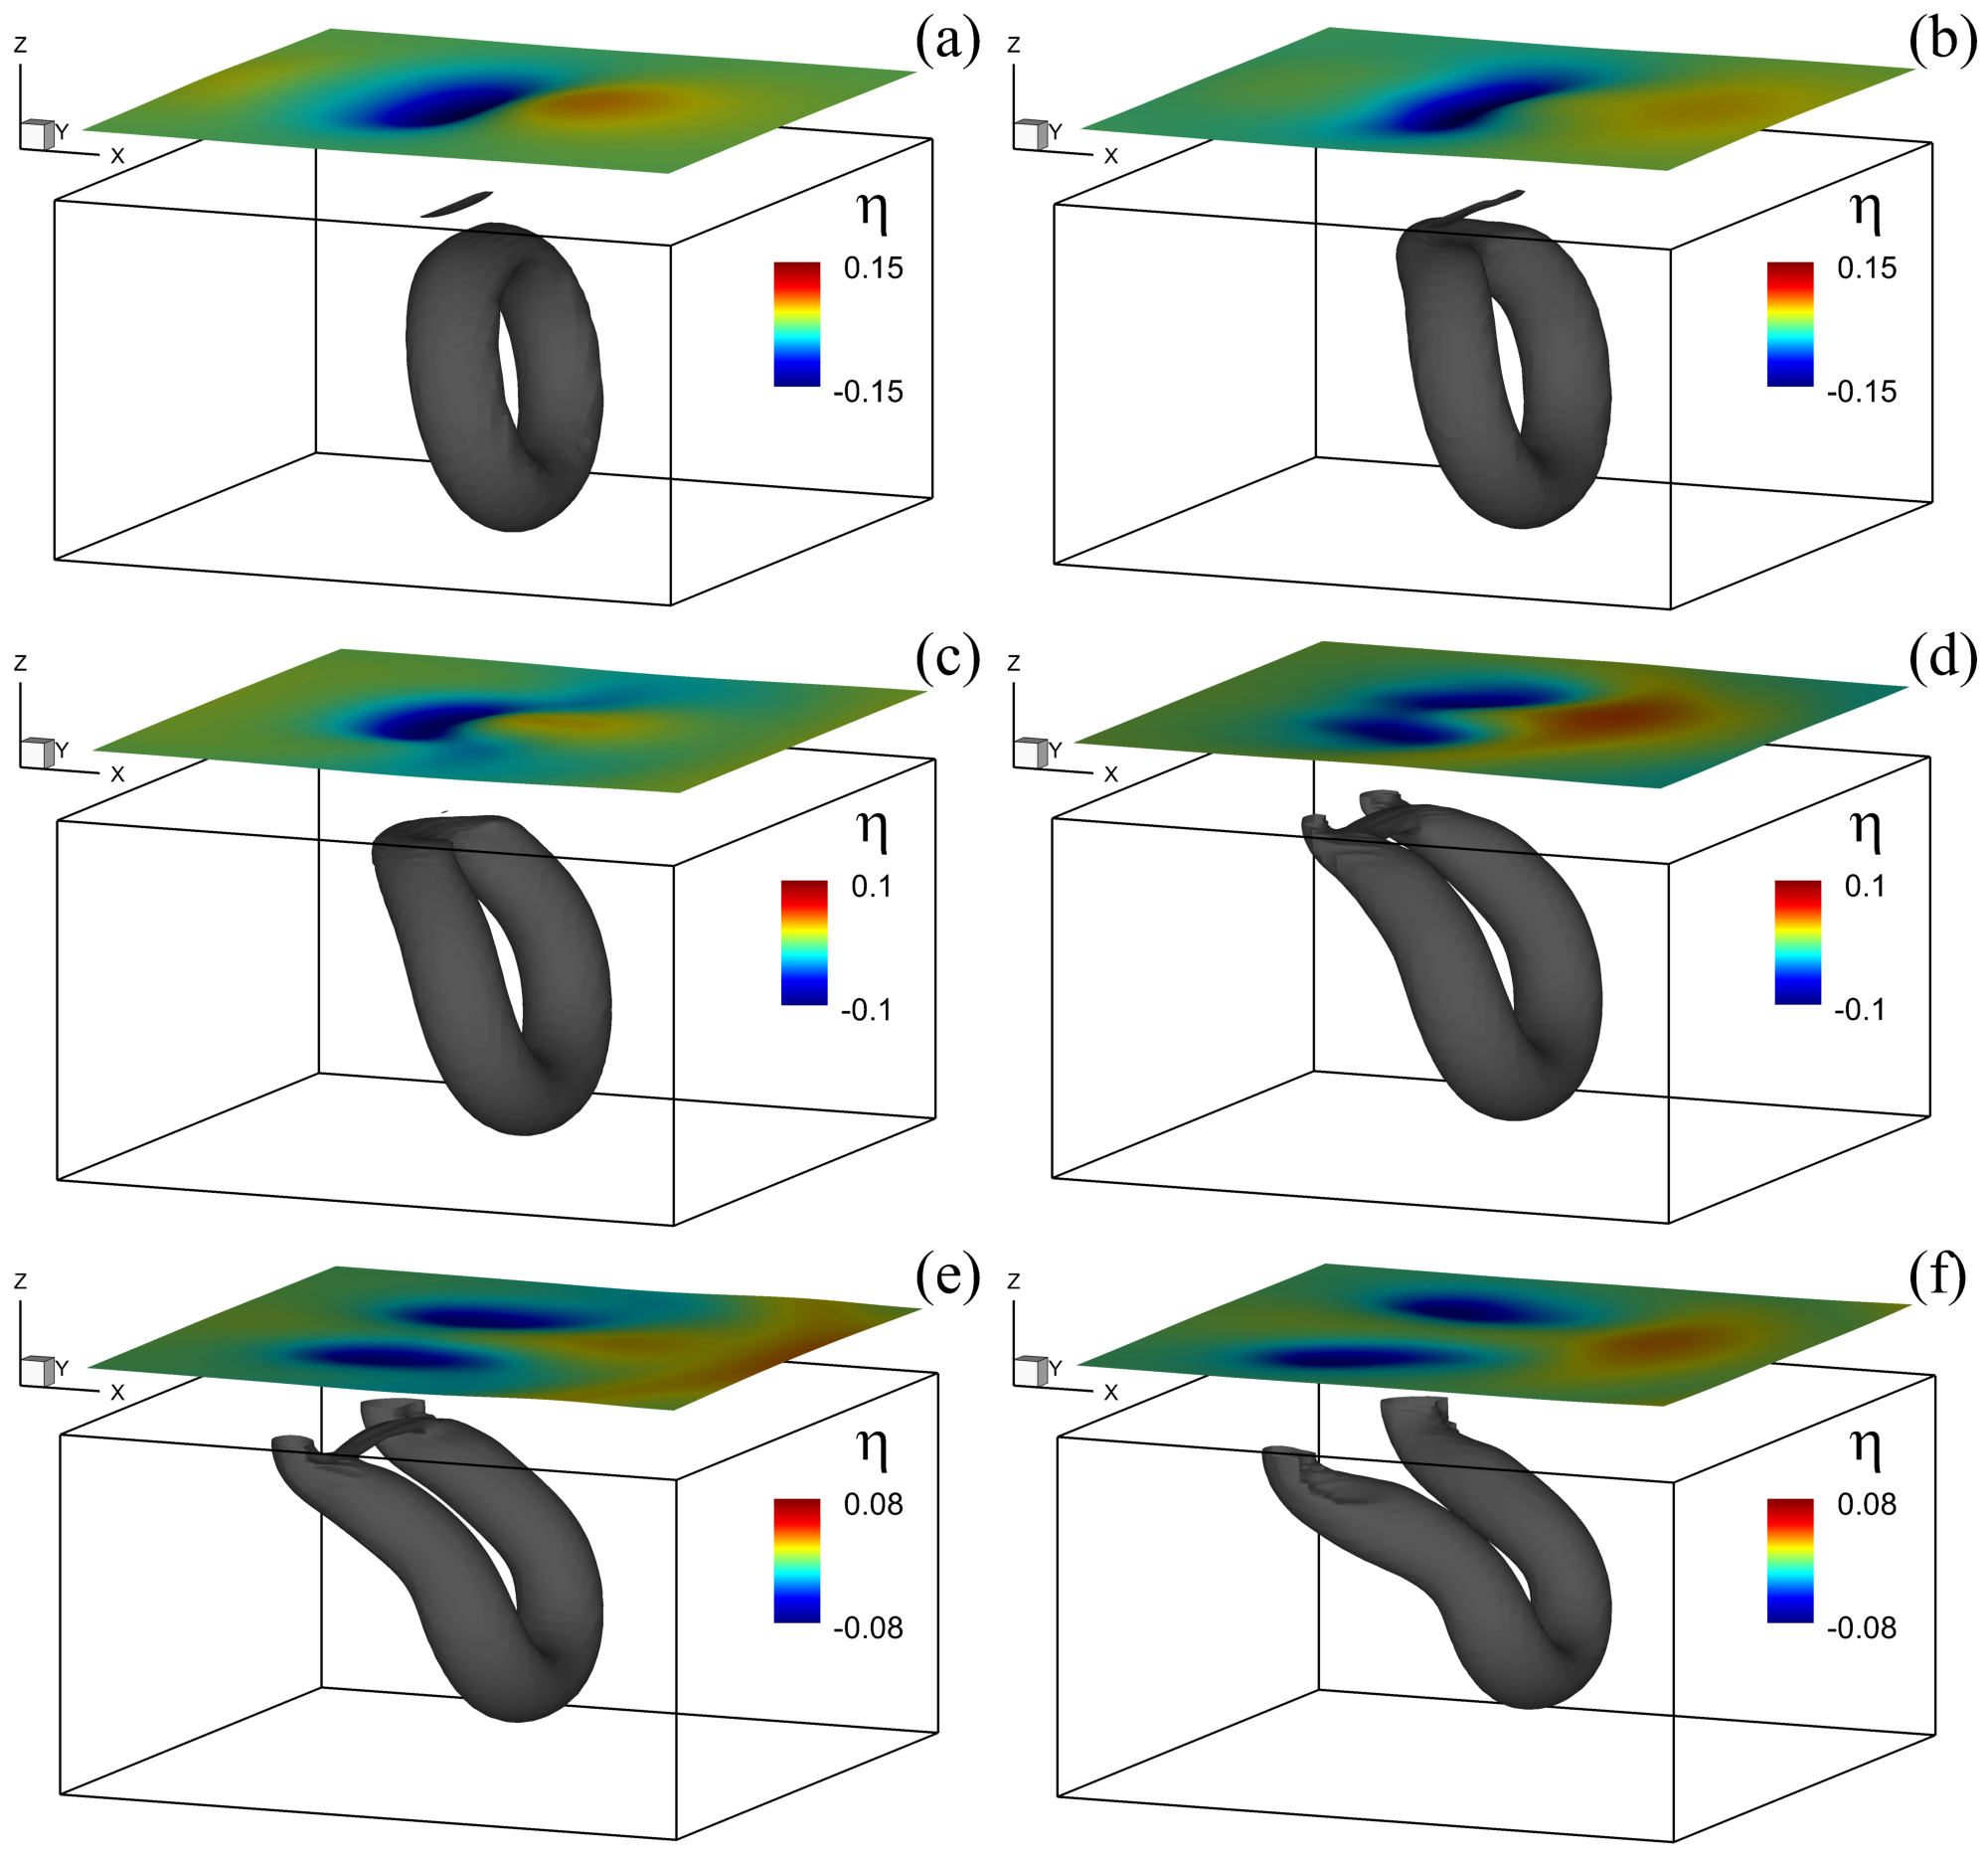 Interaction of a vortex ring with a freely deformable surface.  Panels (a)-(f) show 6 representative stages when the ring connects to the surface.  Contours of instantaneous surface elevation are plotted on the surface.  For better visualization, the surface is artificially shifted up.